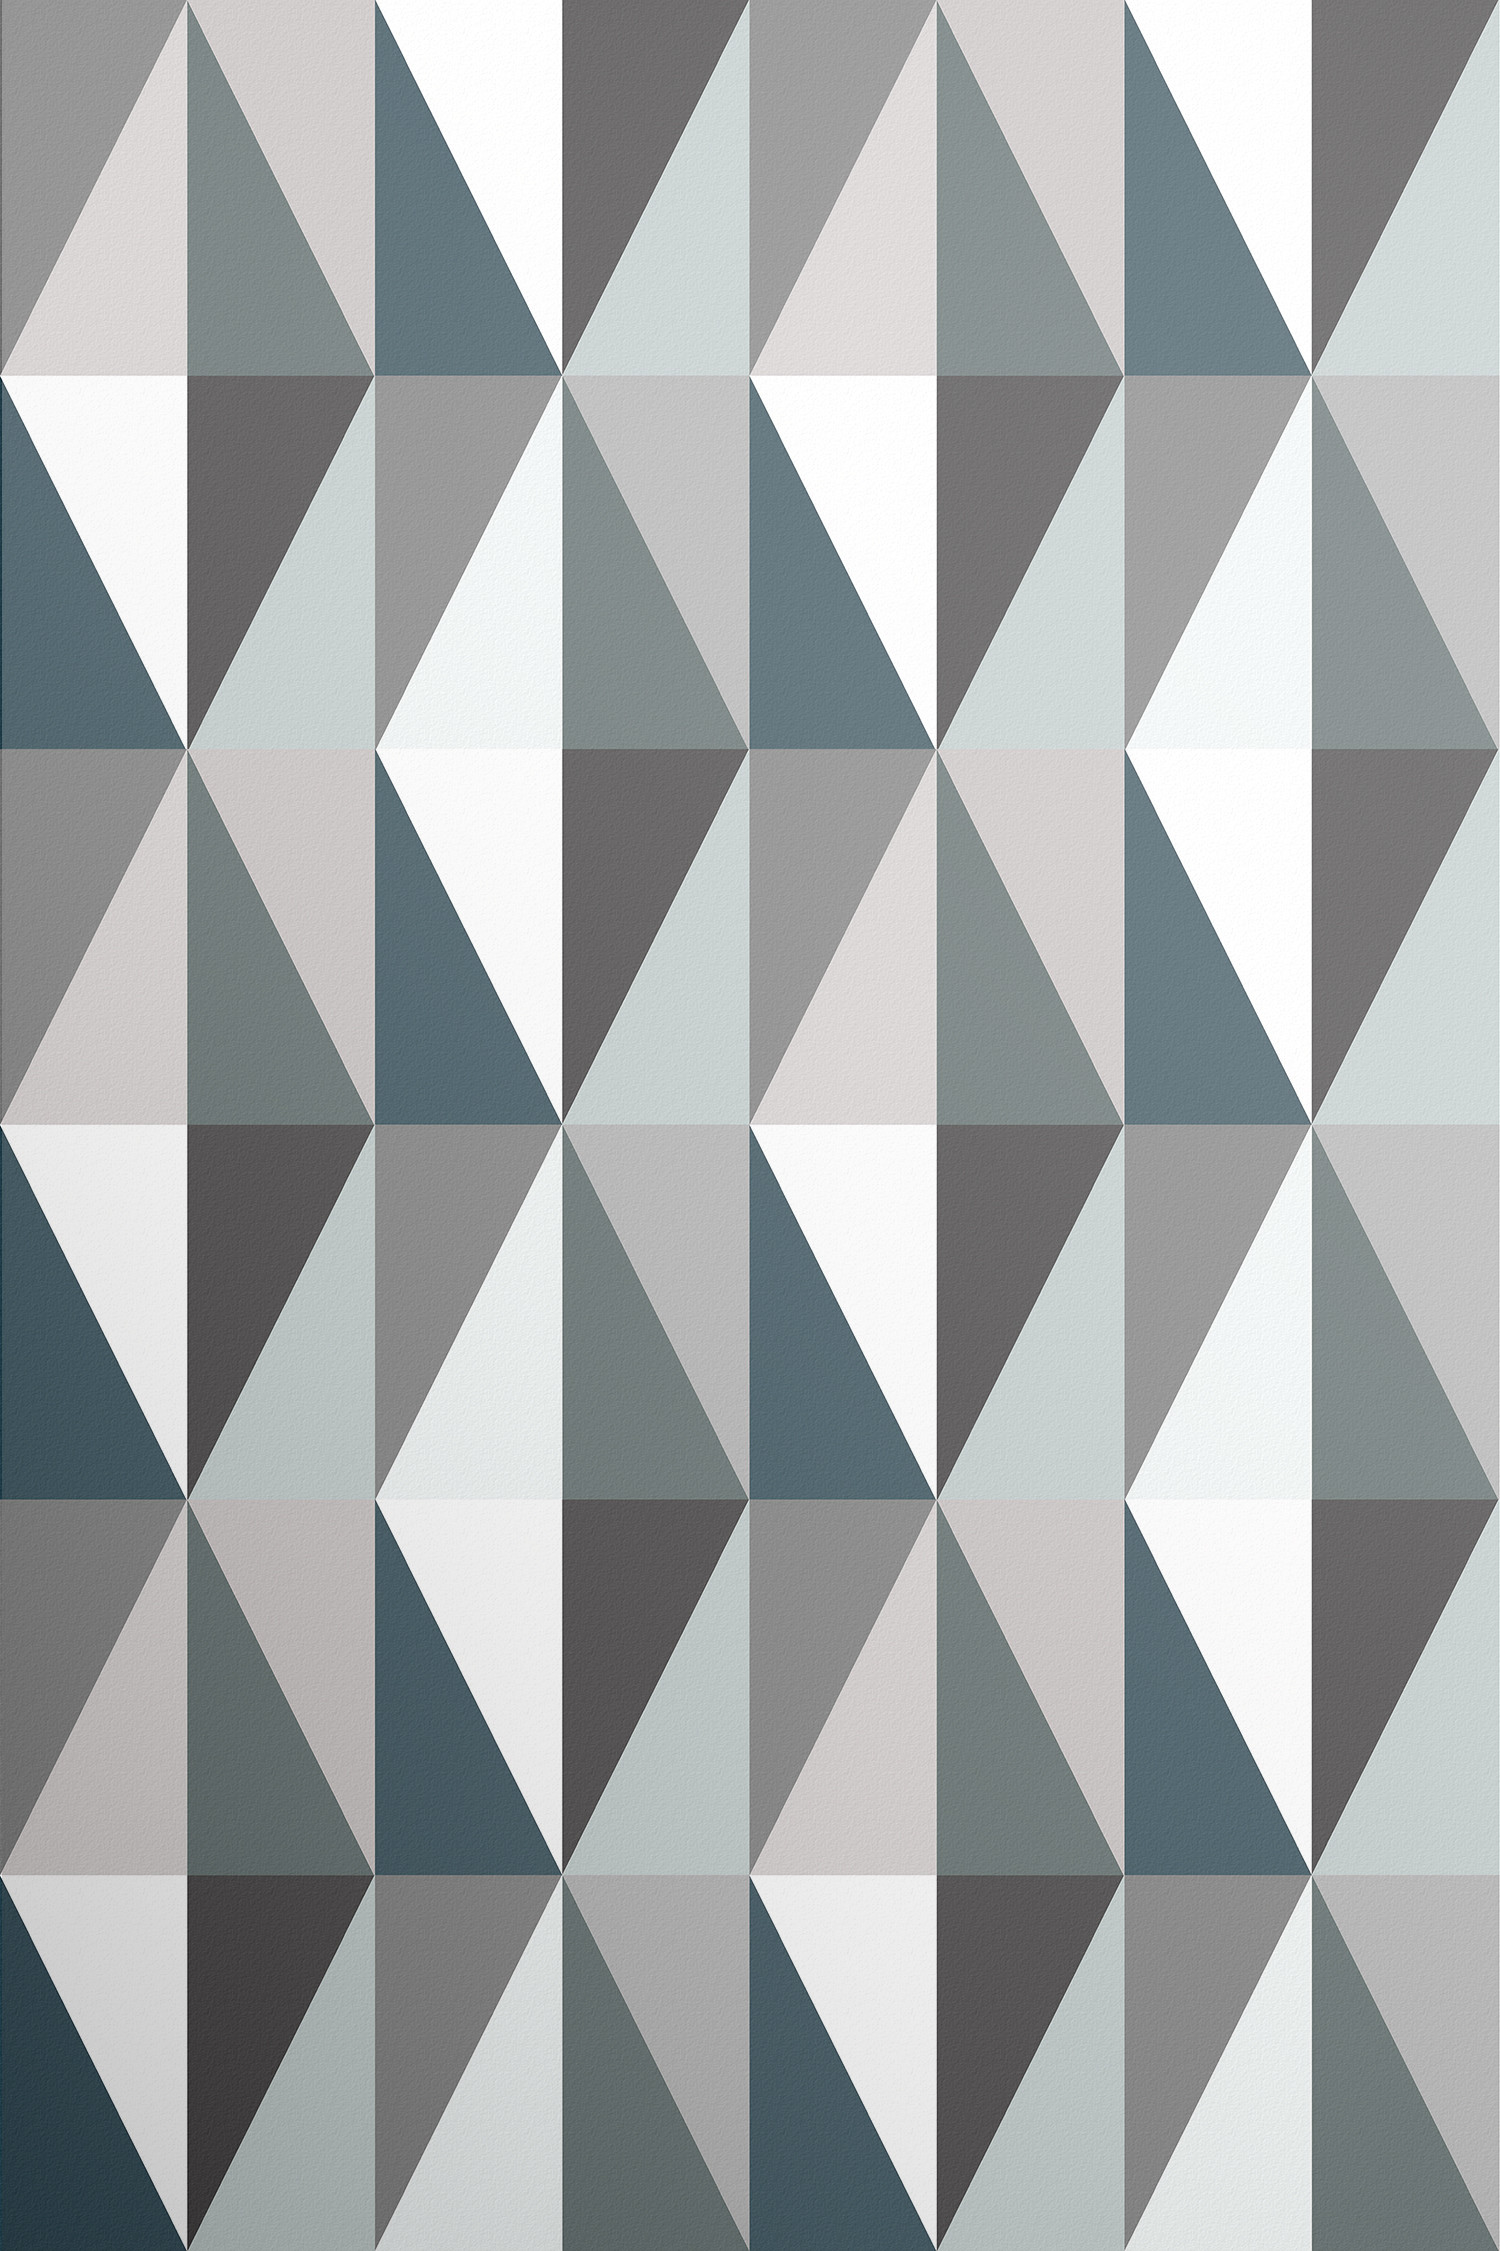 1500x2251 London Underground style tiles of triangles in rich emerald, blue, grey and  white make